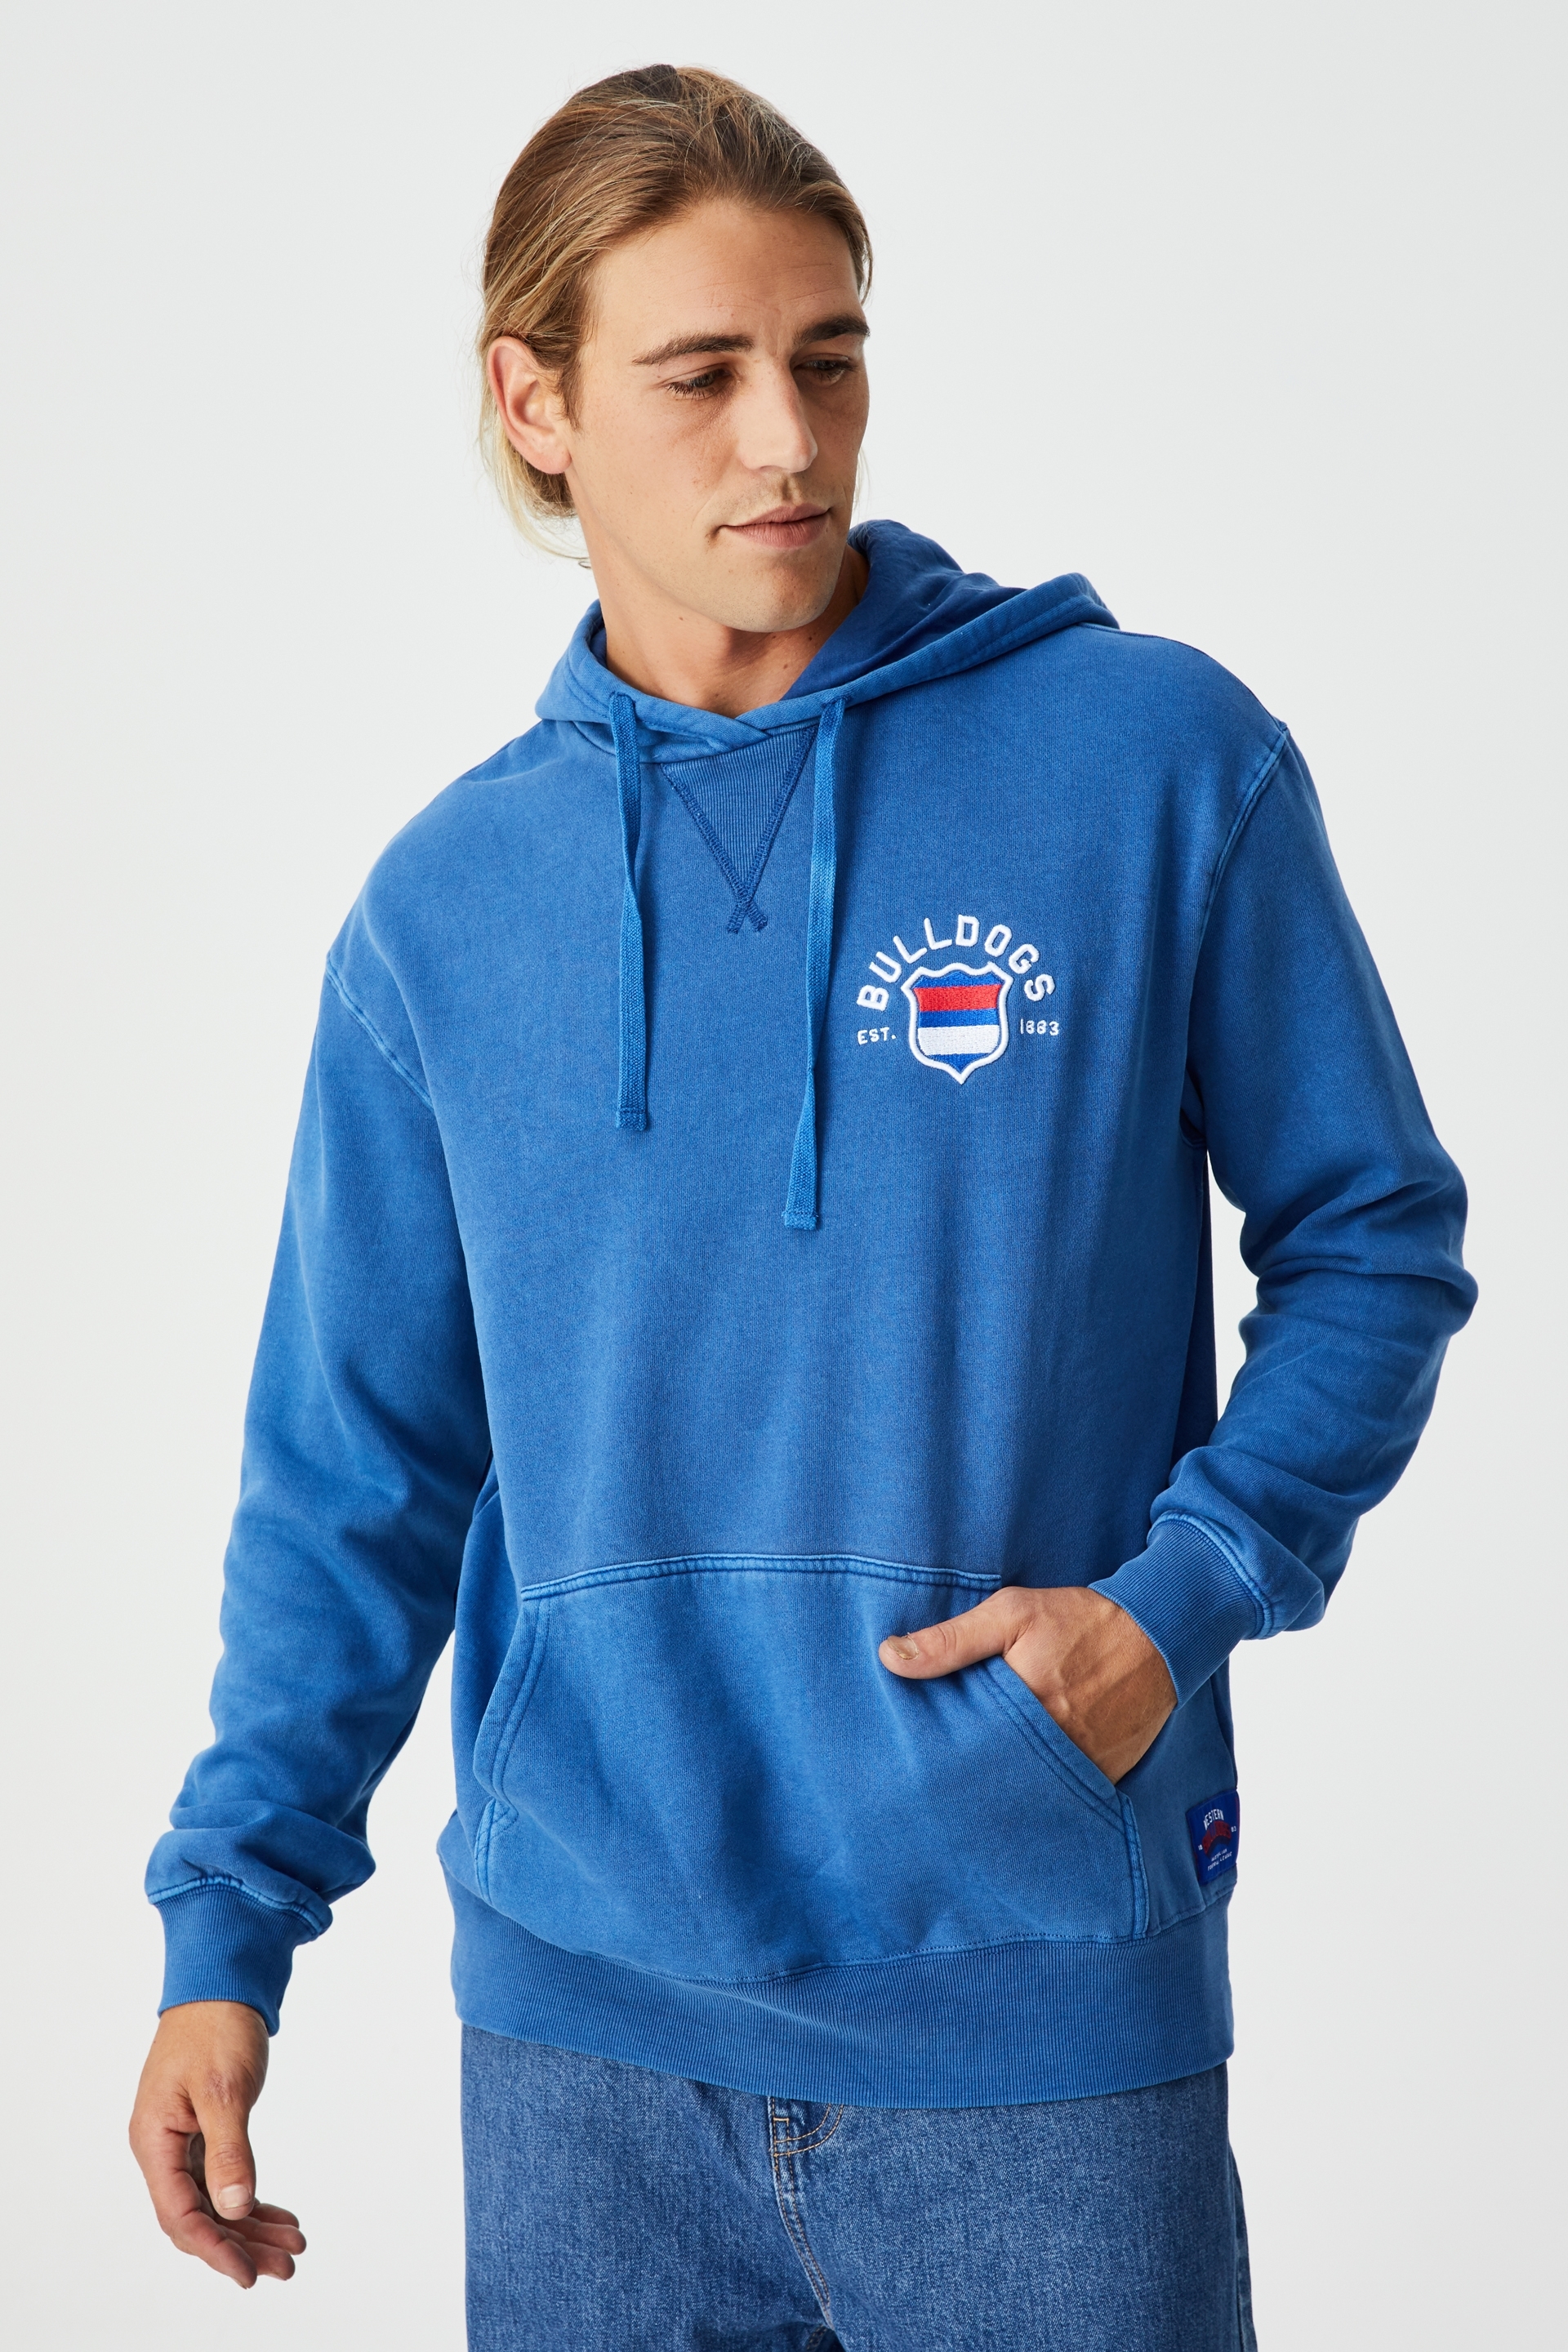 AFL - Afl Mens Chest Embroidery Hoodie - Western bulldogs